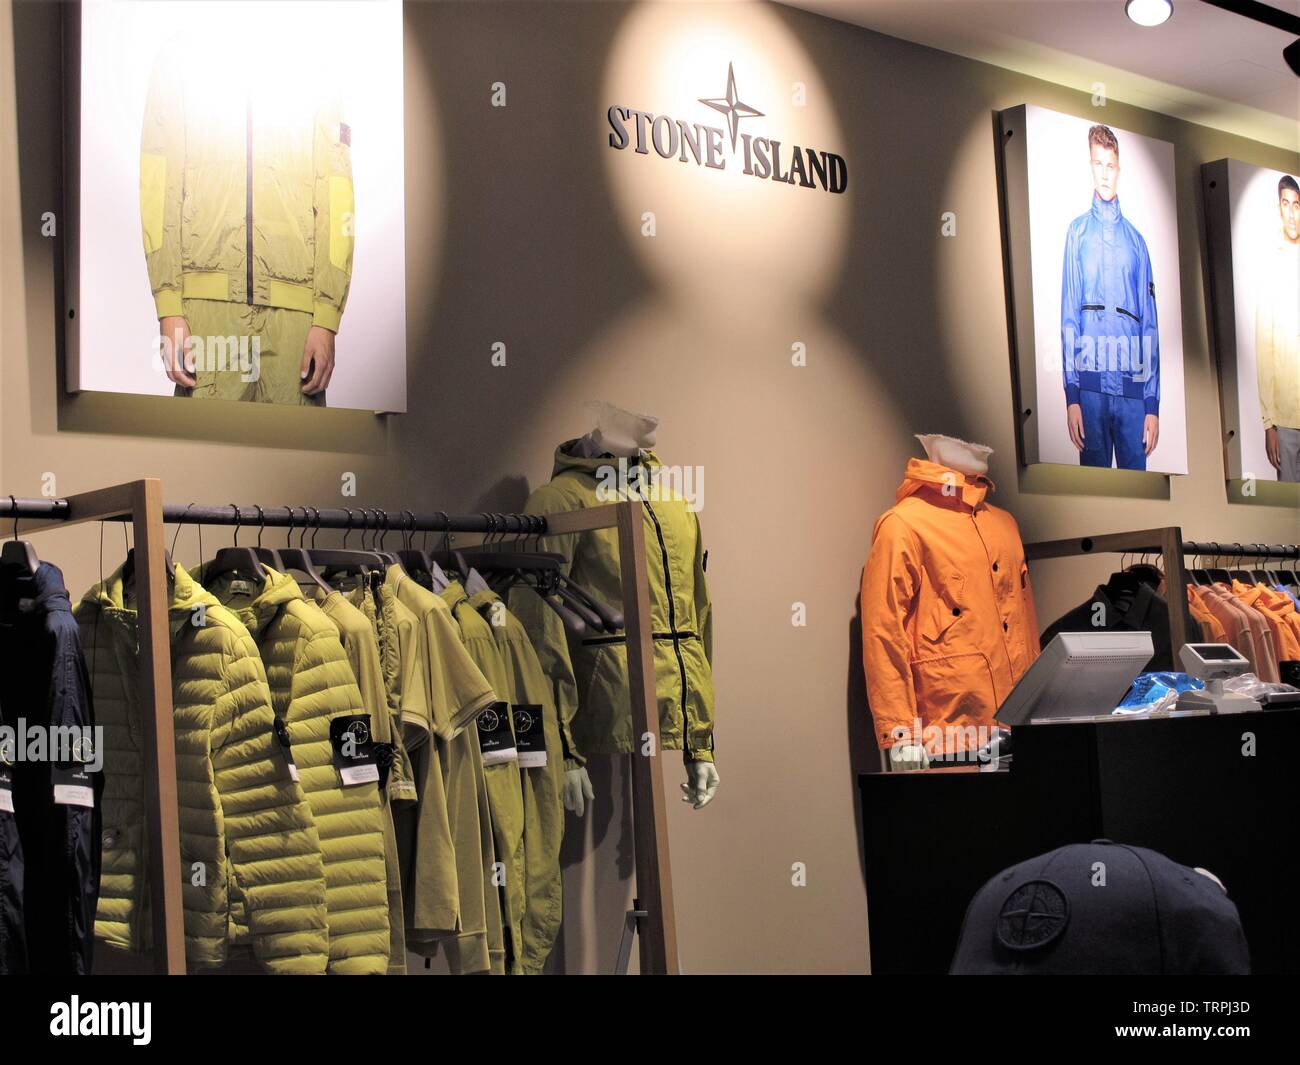 Stone Island clothing at the Rinascente fashion store in Rome Stock Photo -  Alamy